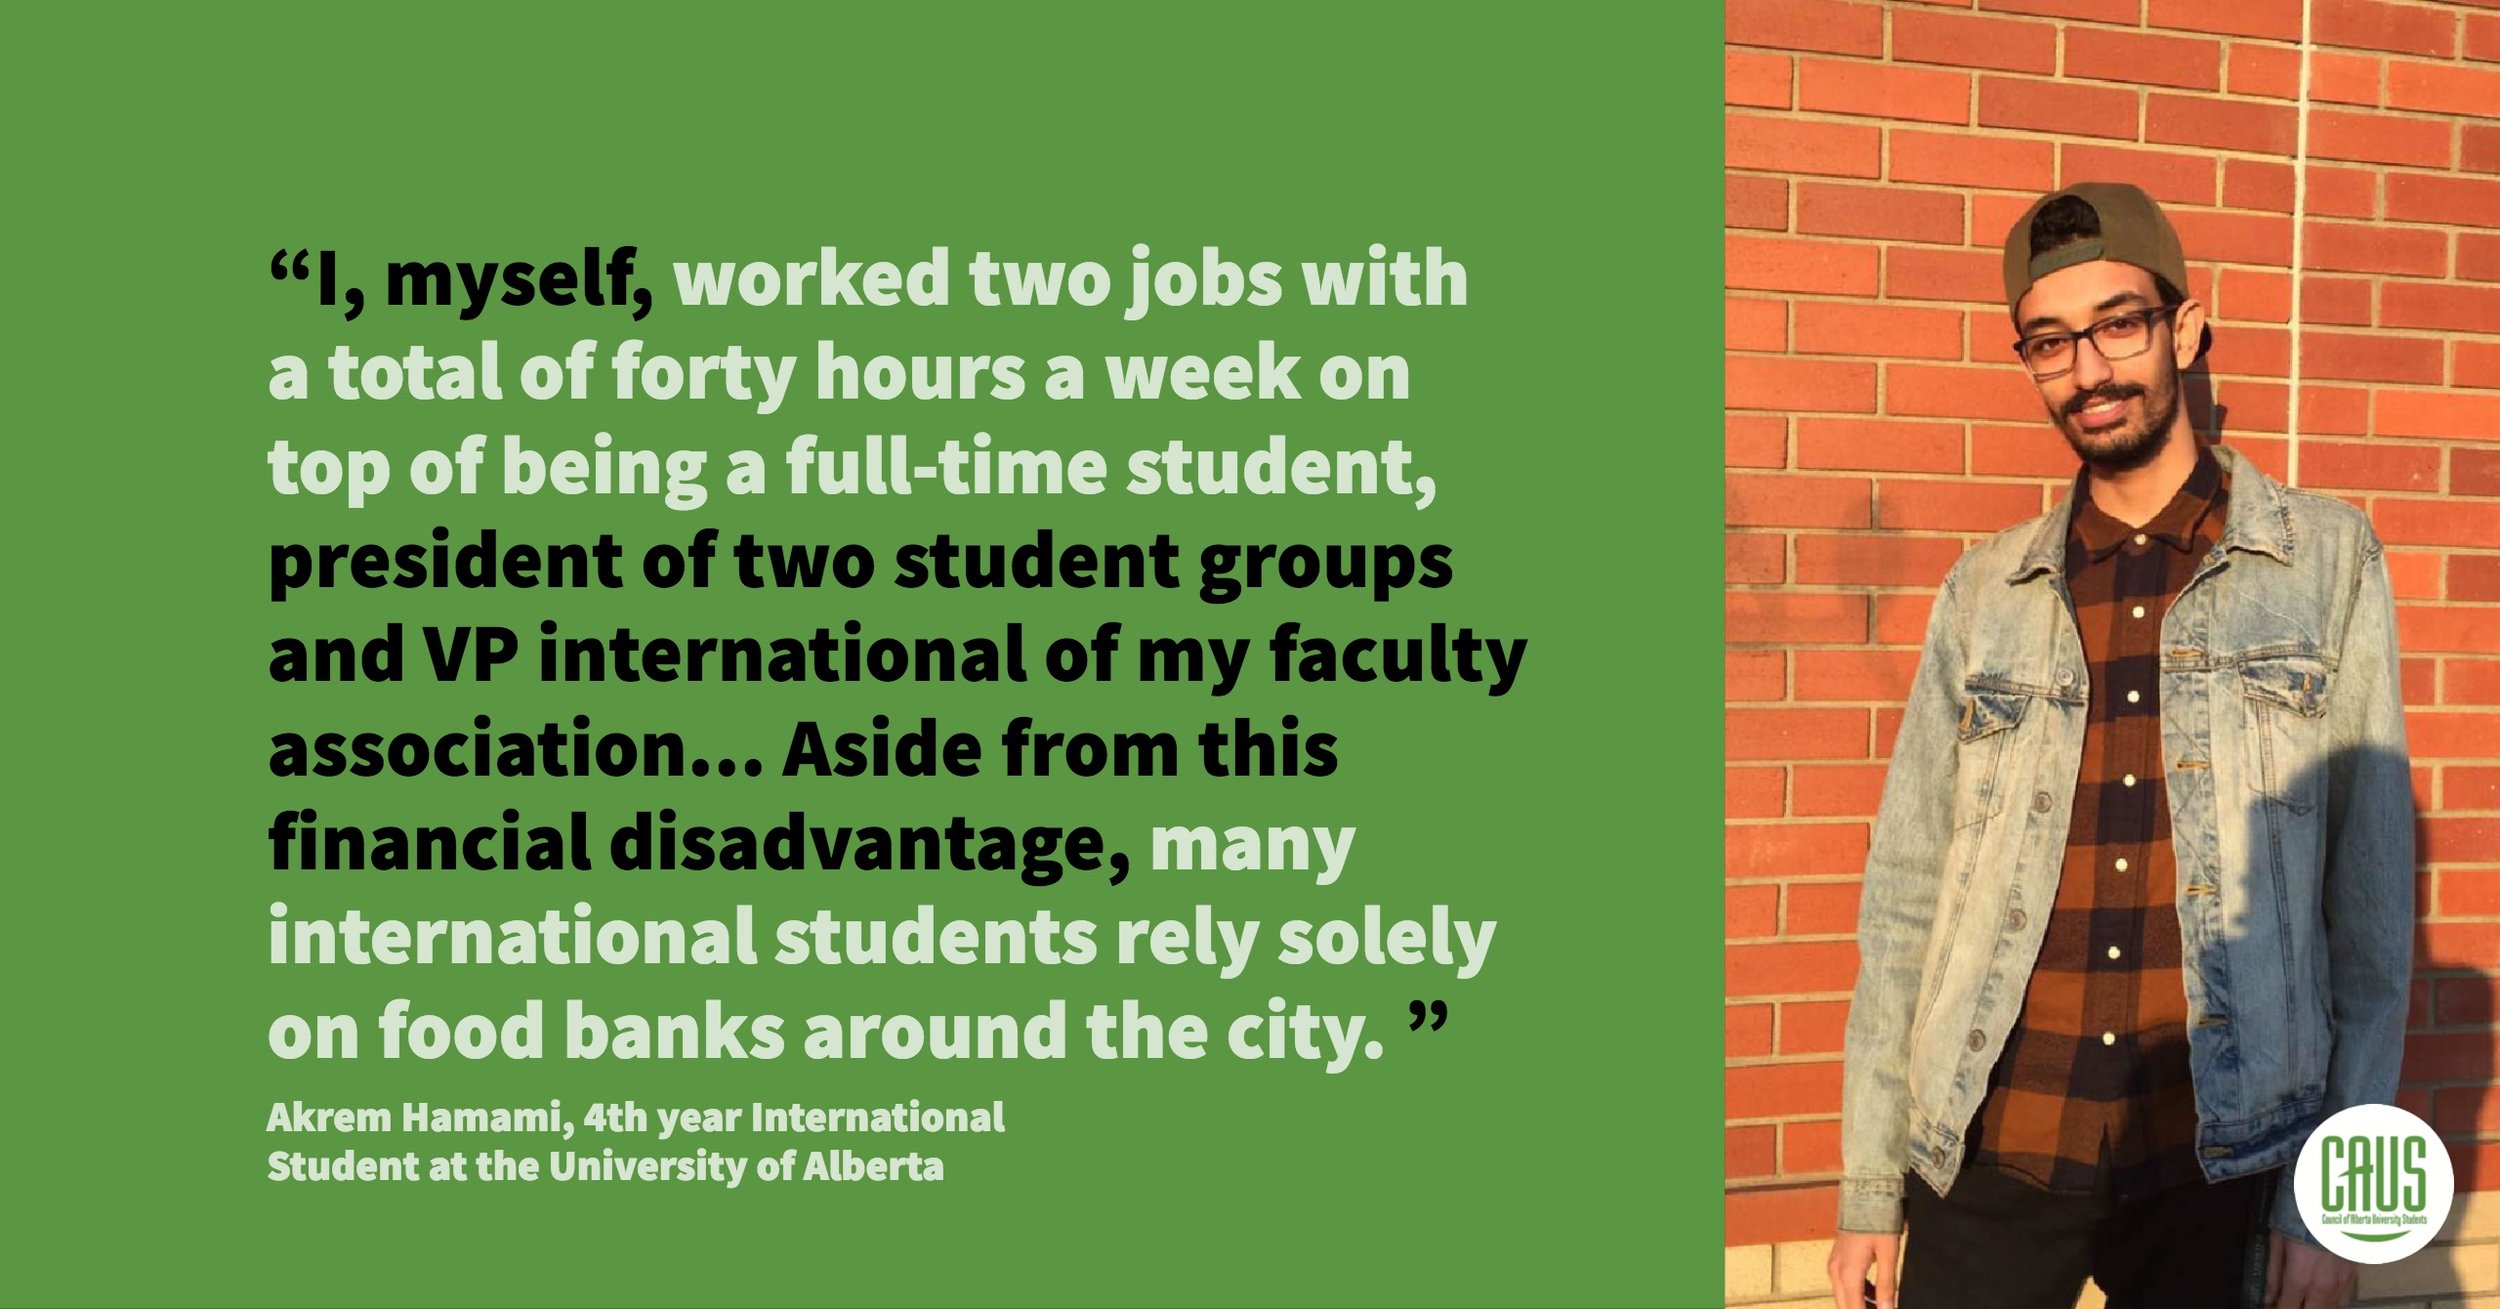  “As an international student, I have a great deal of knowledge about the disadvantages that we face here at the U of A. One of the main issues that many international students have to overcome is the issue of housing. Because the cost of residence i